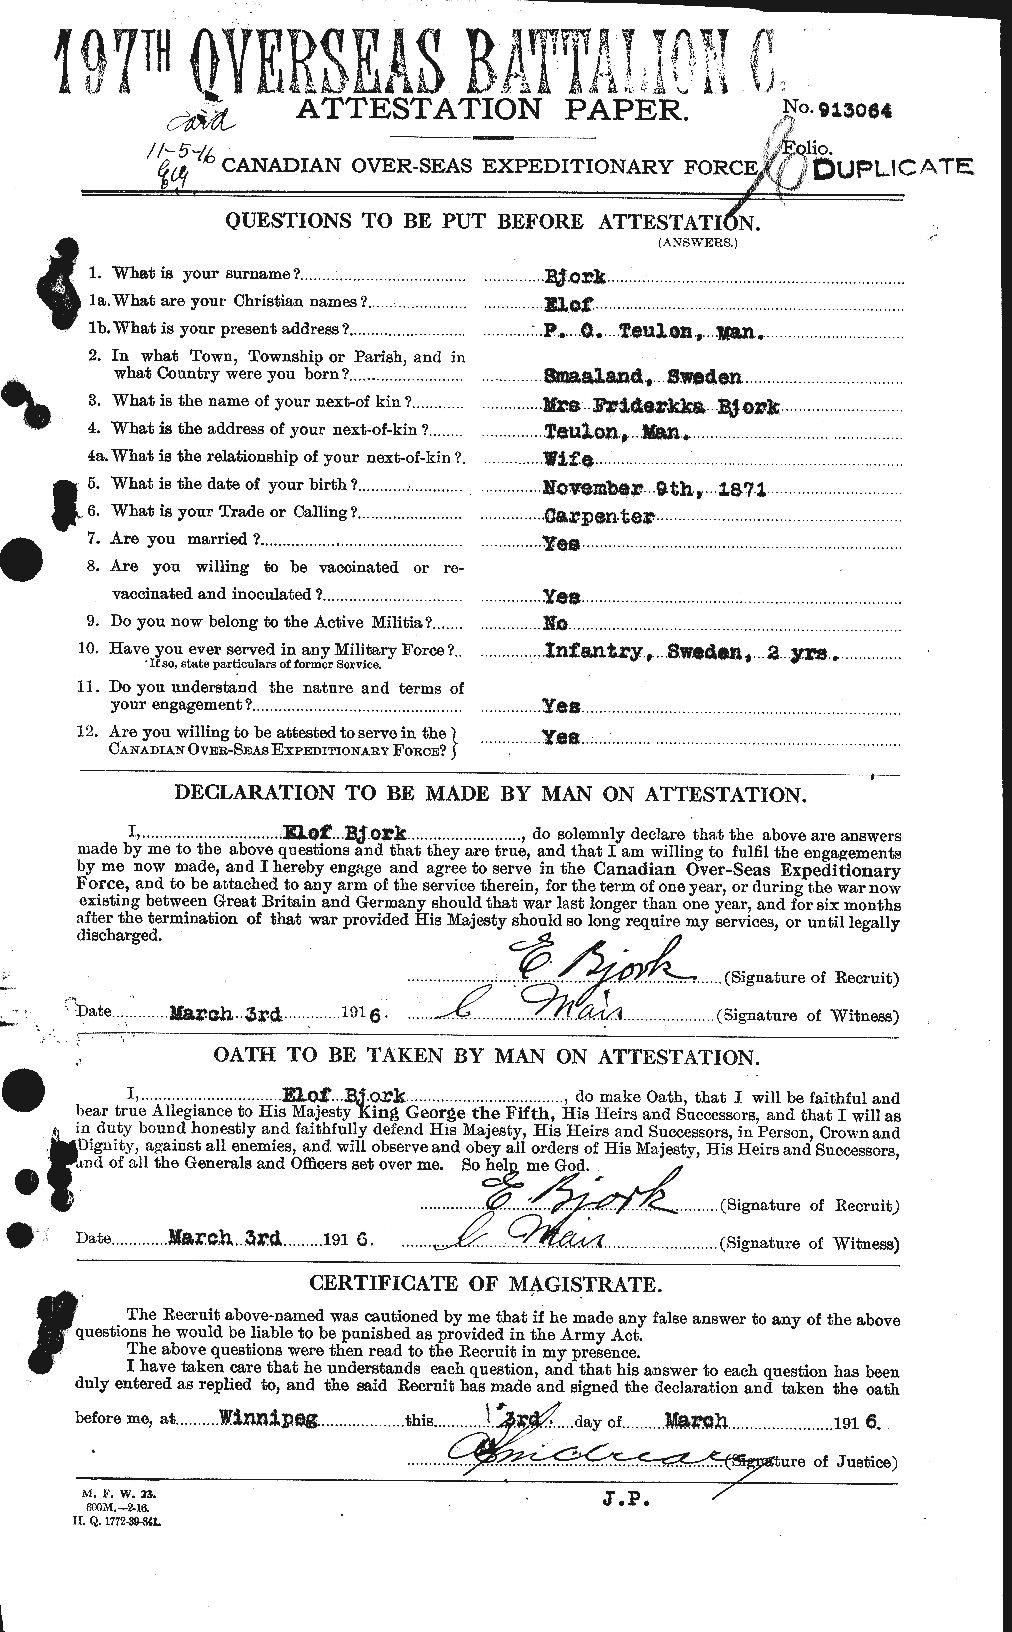 Personnel Records of the First World War - CEF 241105a